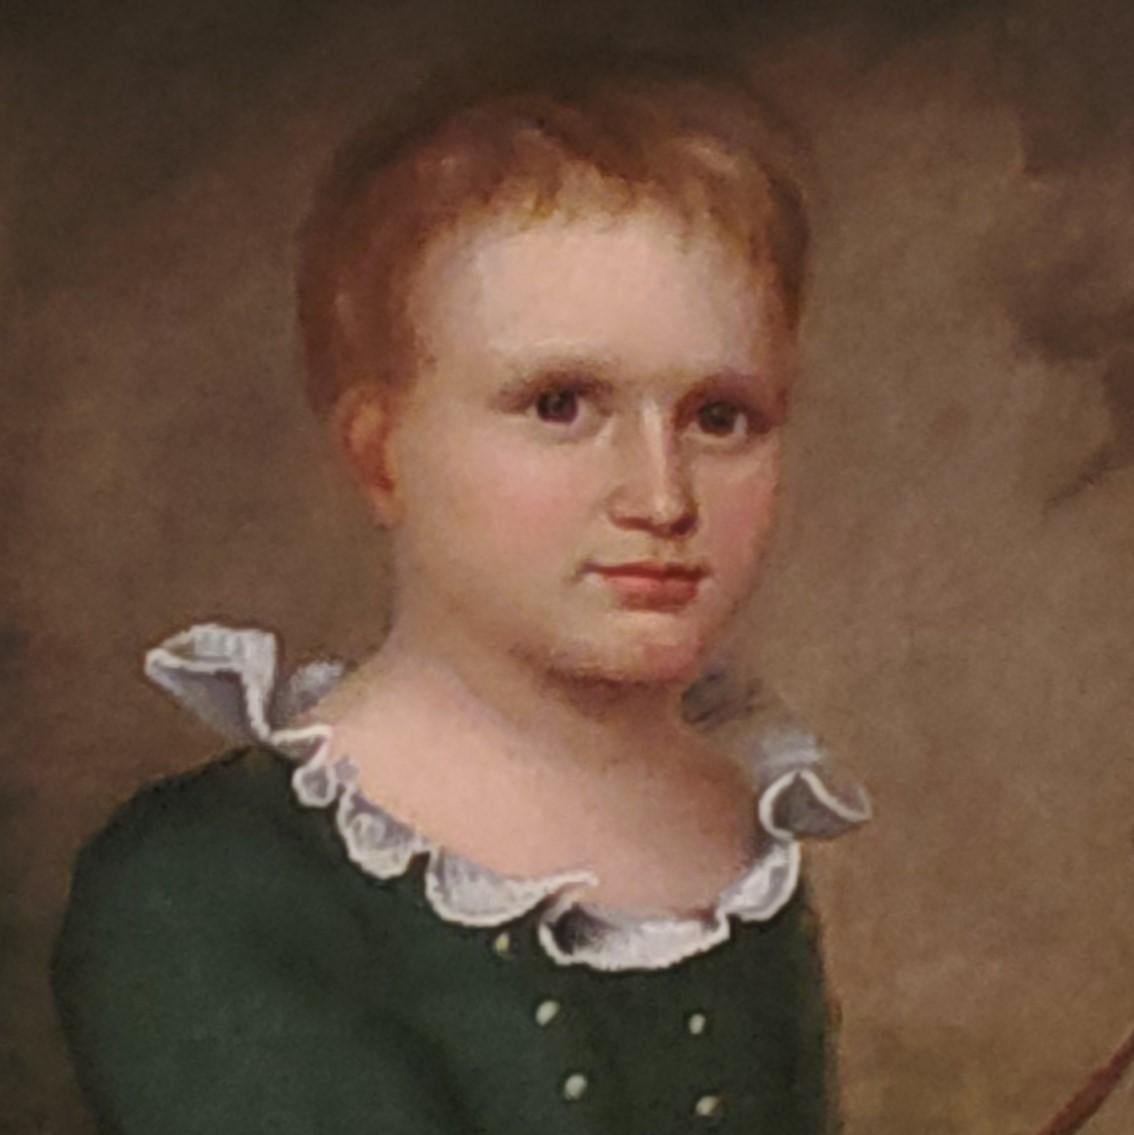 This oil on canvas measures 30 inches by 25 inches and is a portrait of a young boy holding a bow. 

In the frame this painting measures 35.5 inches tall by 30.5 inches wide.  Lined and restored.

According to the Kennedy gallery label on the back